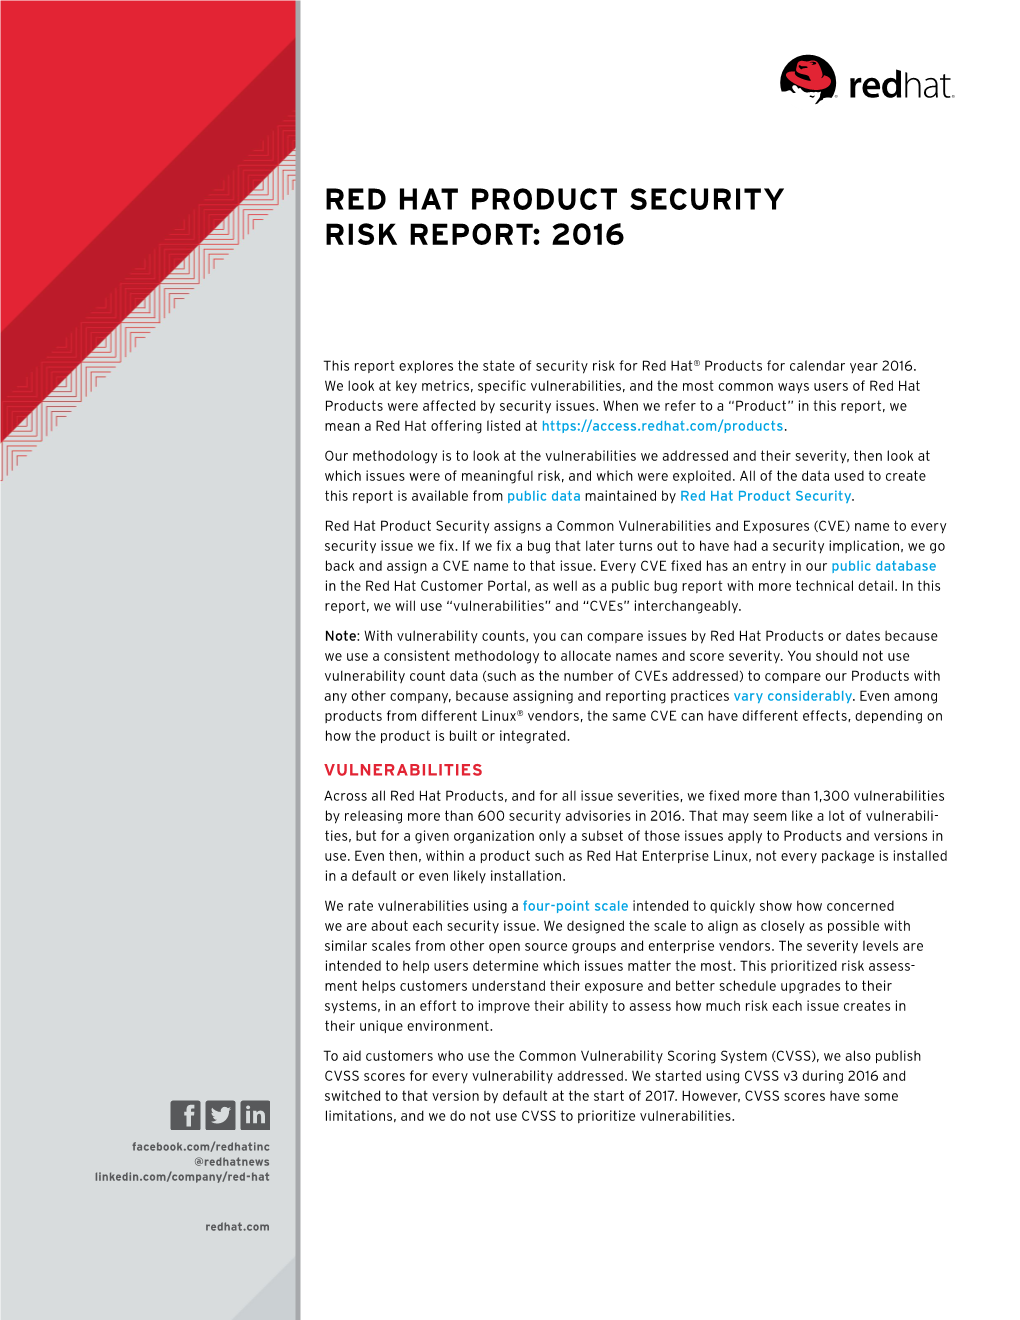 Red Hat Product Security Risk Report: 2016